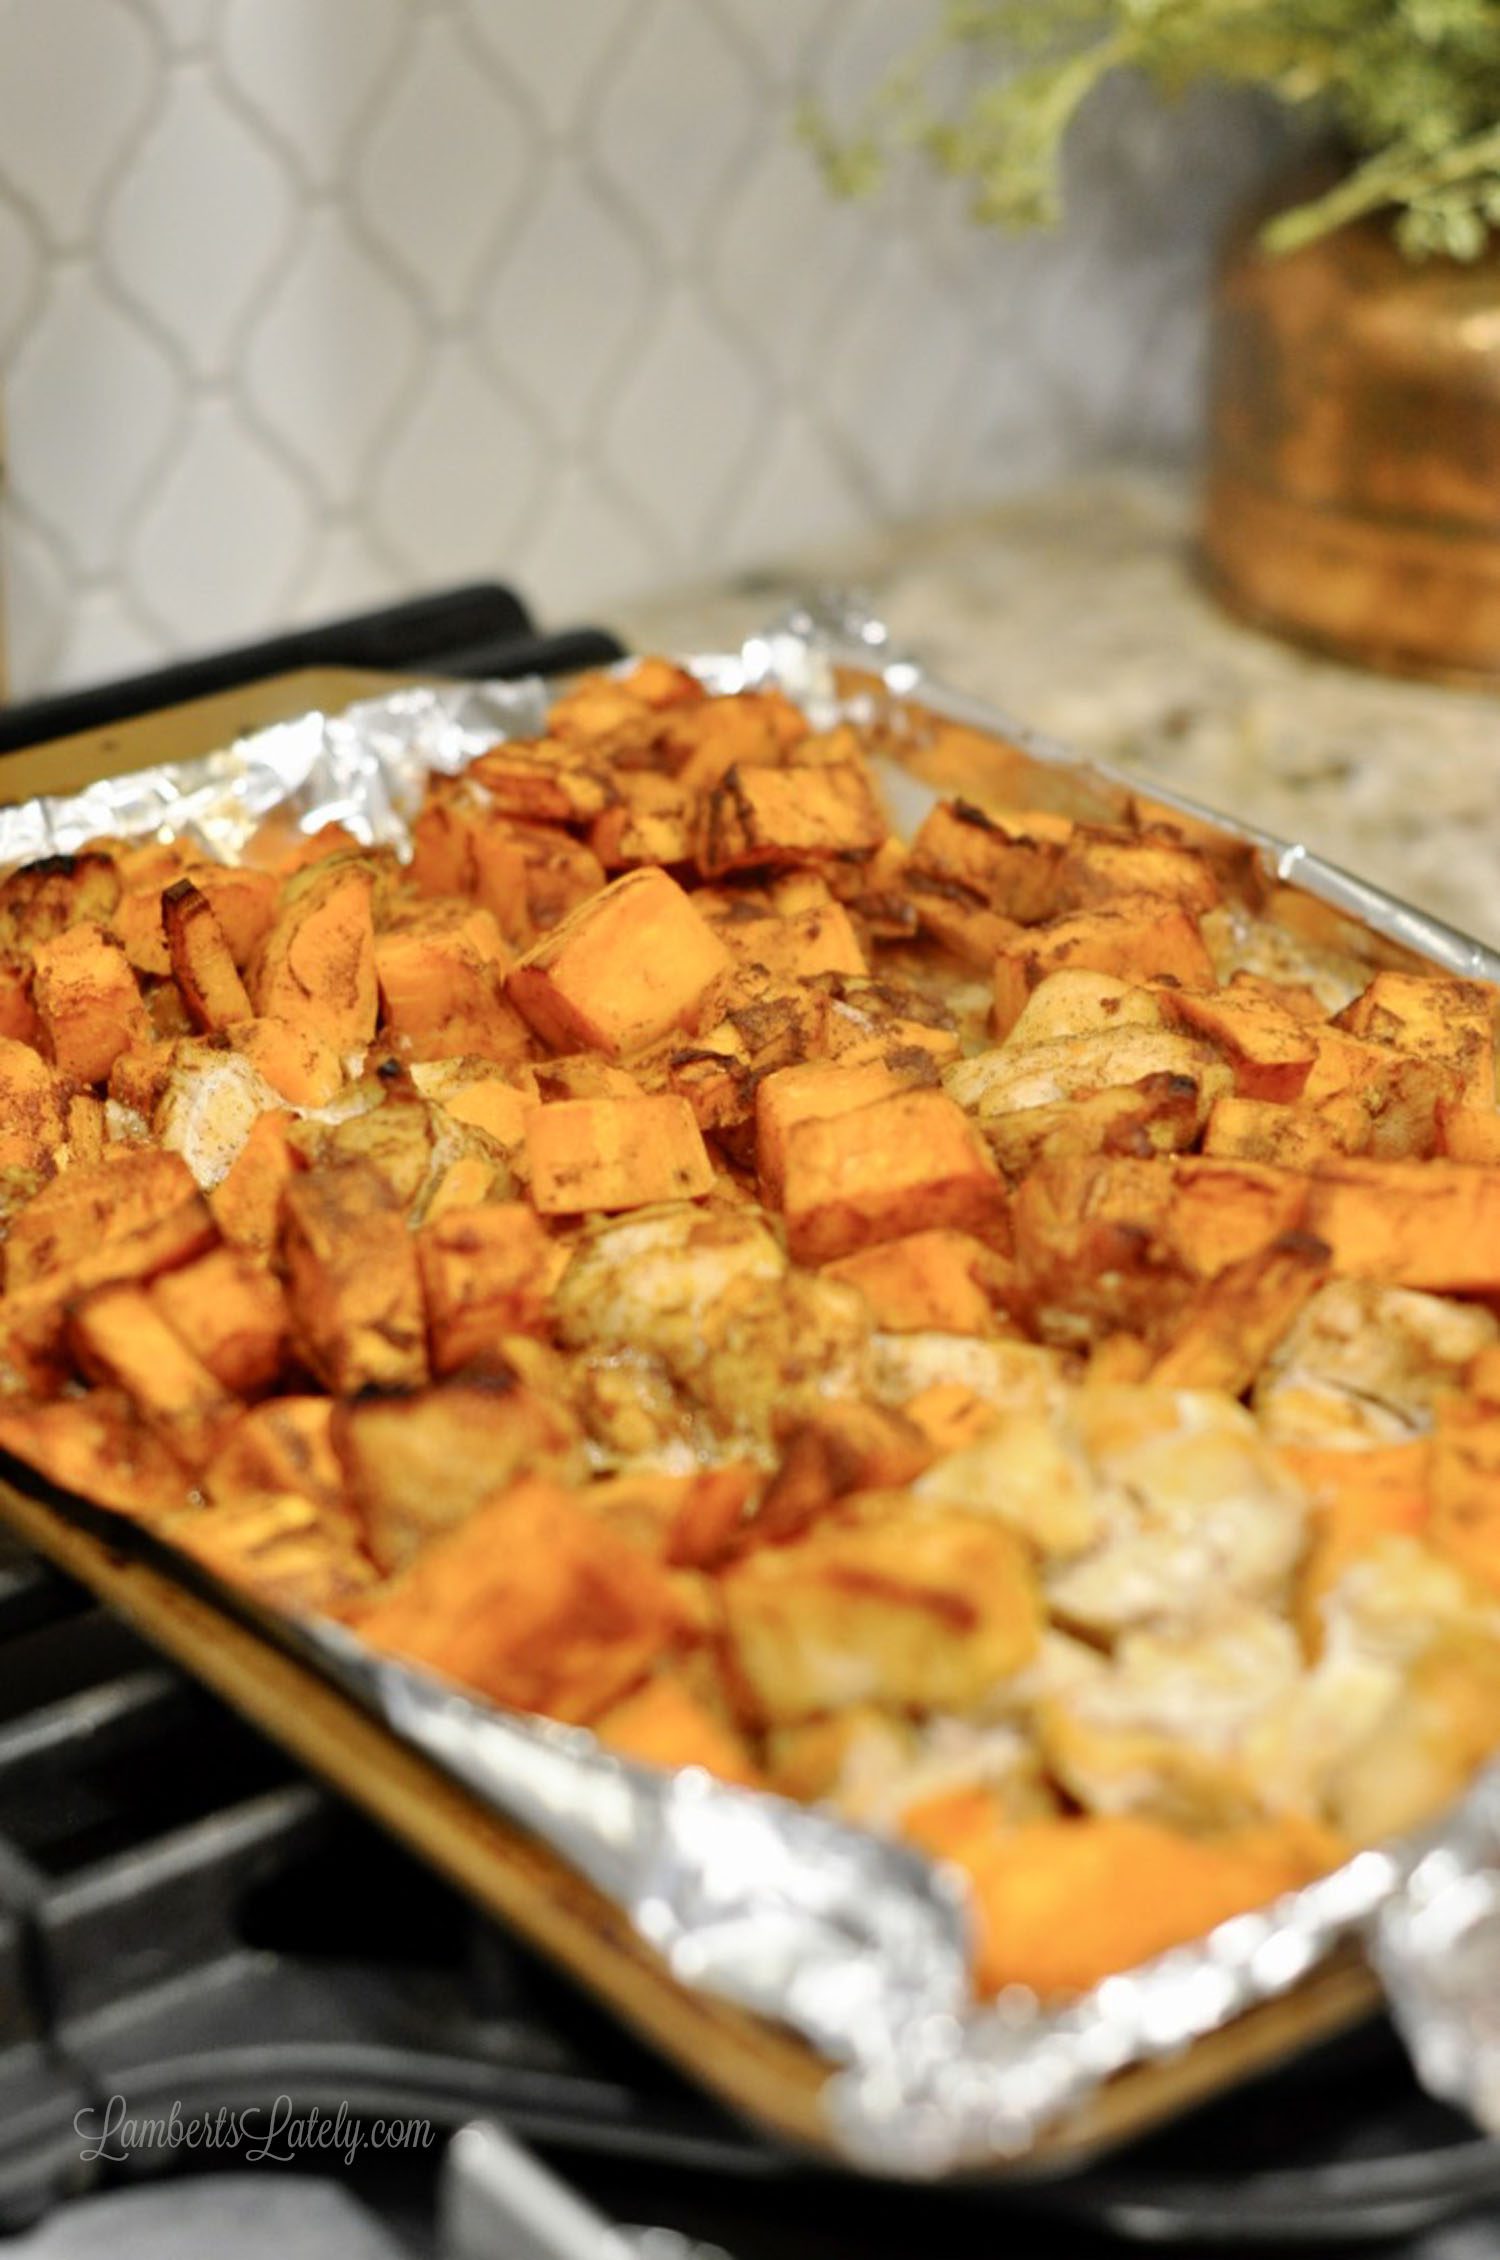 chicken and sweet potatoes on a sheet pan lined with foil on a stove.